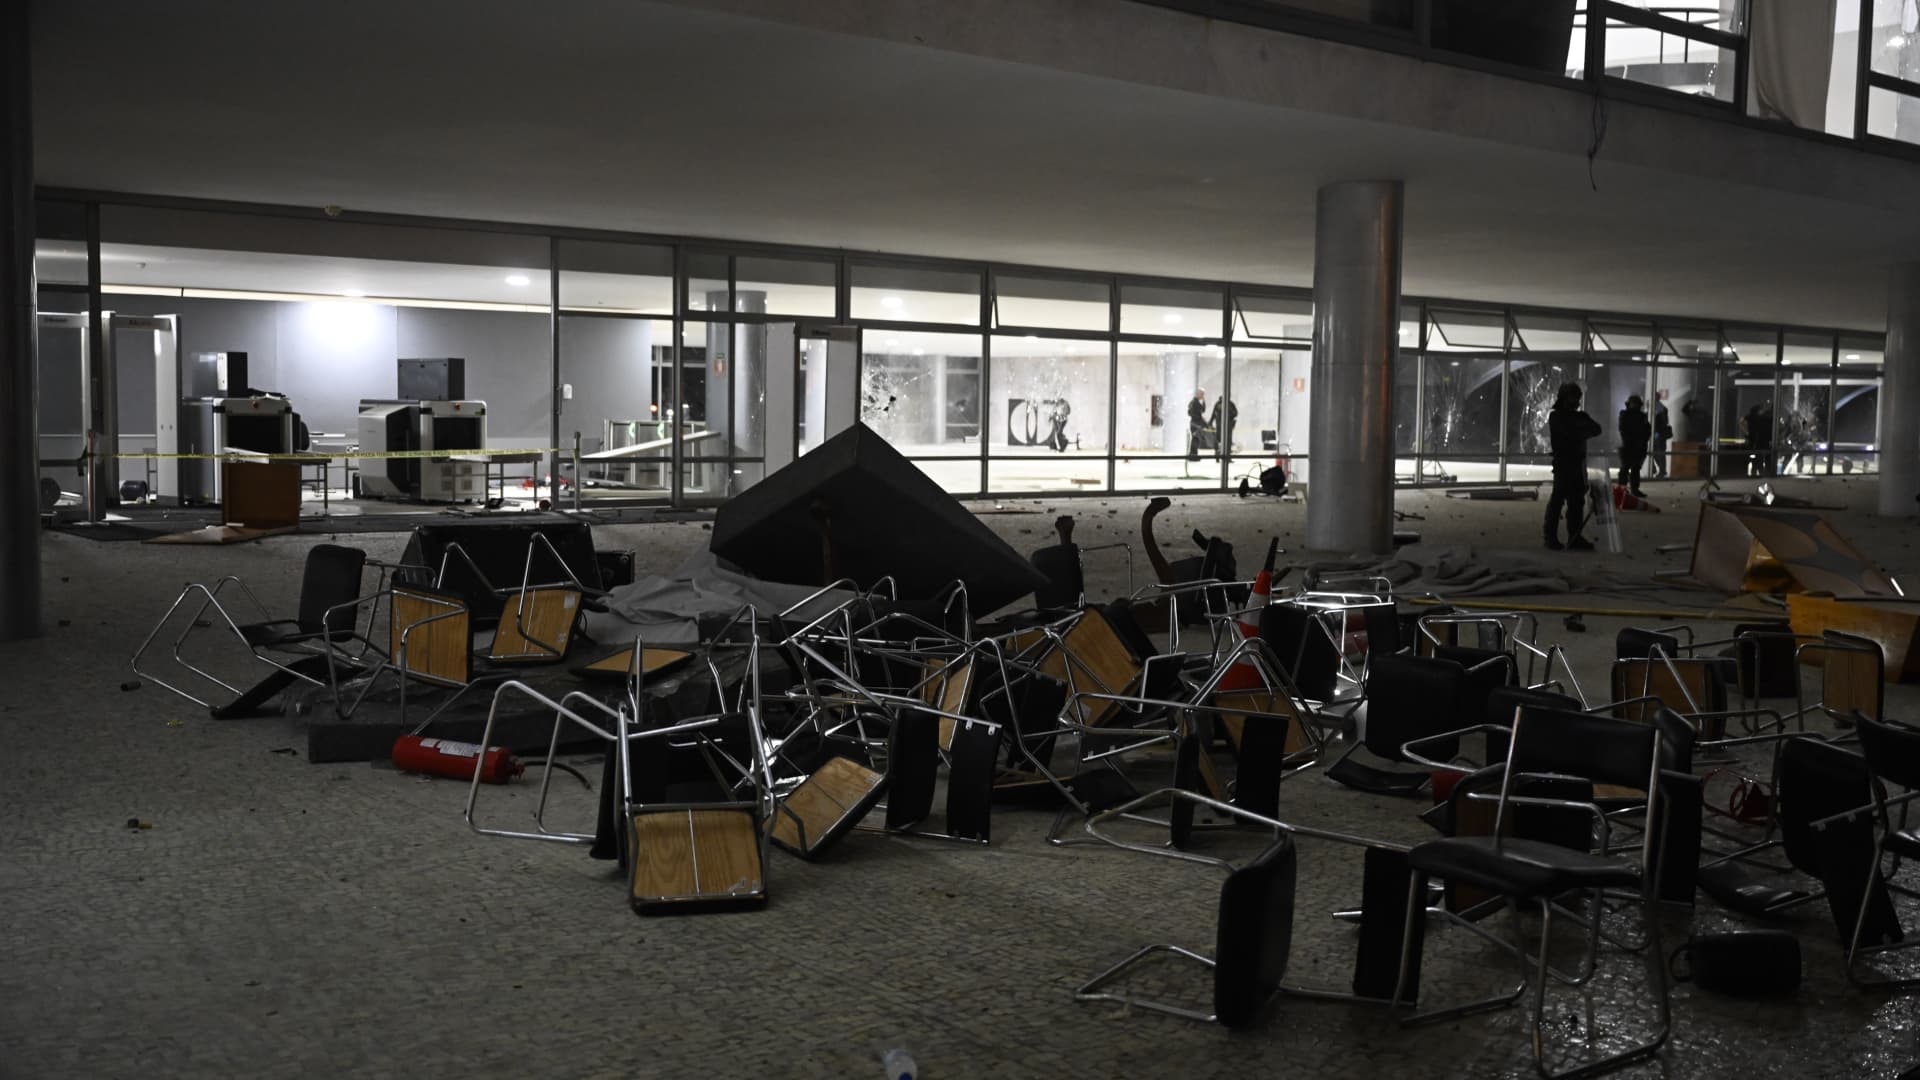 BRASILIA, Brazil - Jan. 08, 2023: Damaged furniture are seen piled in front of the Palacio do Planalto (the official workplace of the president of Brazil) following a protest by supporters of Brazil's former President Jair Bolsonaro against President Luiz Inacio Lula da Silva.